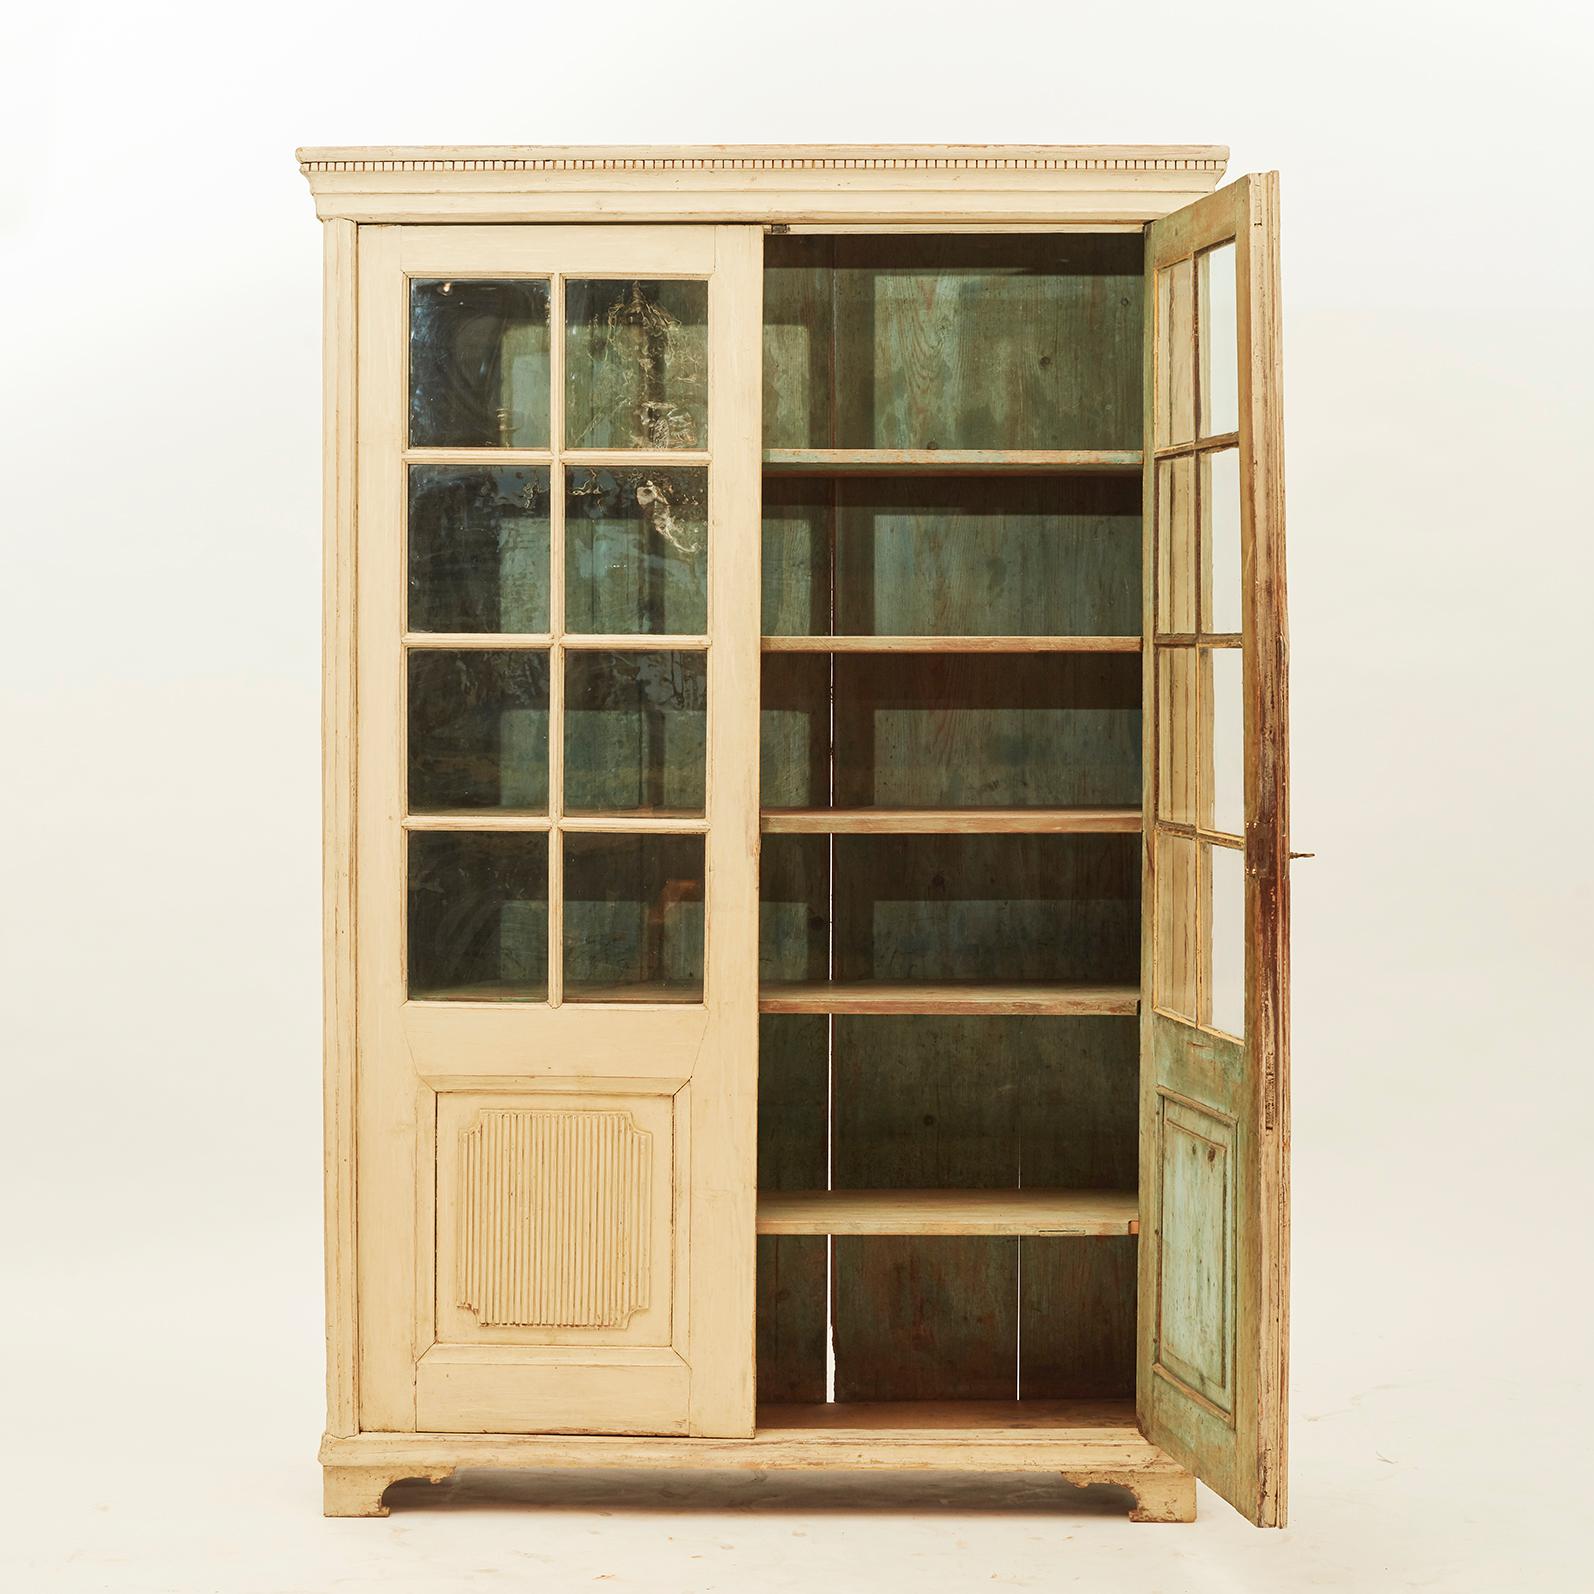 A Swedish Gustavian glass cabinet, circa 1820. Pair of doors with slats. Bottom with canned fillings. Light yellow color, inside blue or green color. A charming cabinet with good natural patina. Sweden 1820-1830.